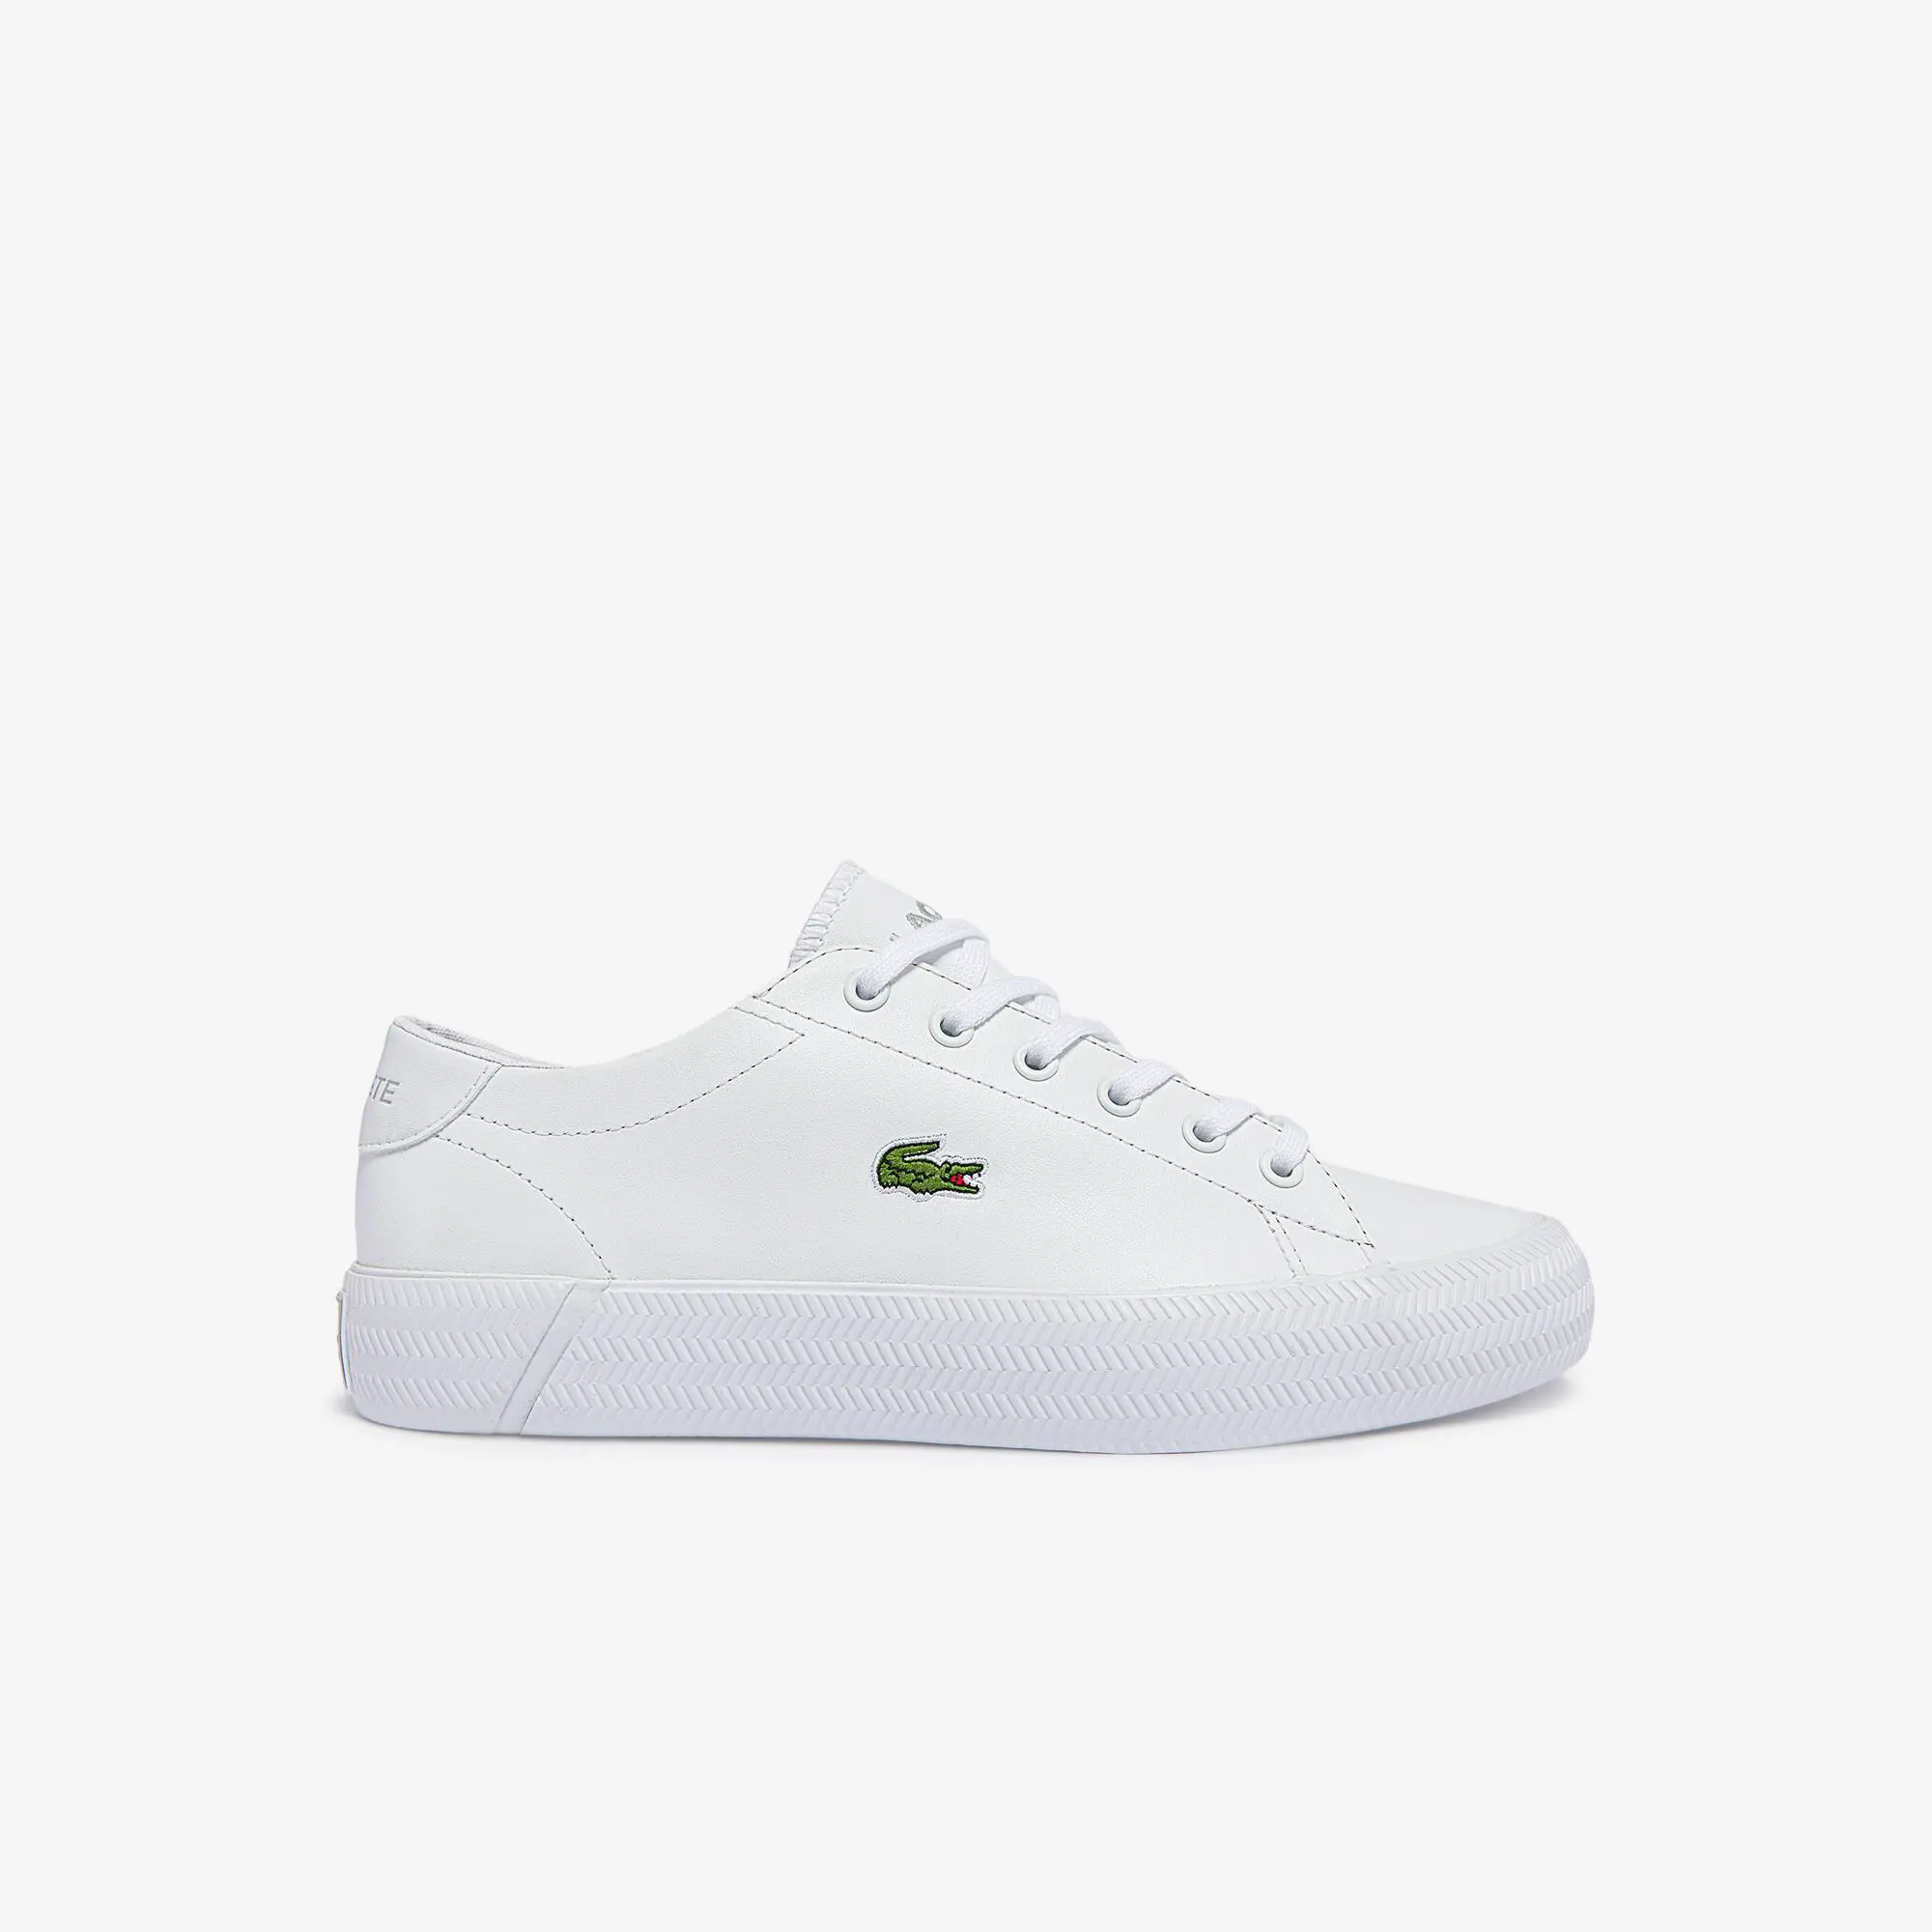 Lacoste Women's Gripshot BL Leather and Synthetic Trainers. 1